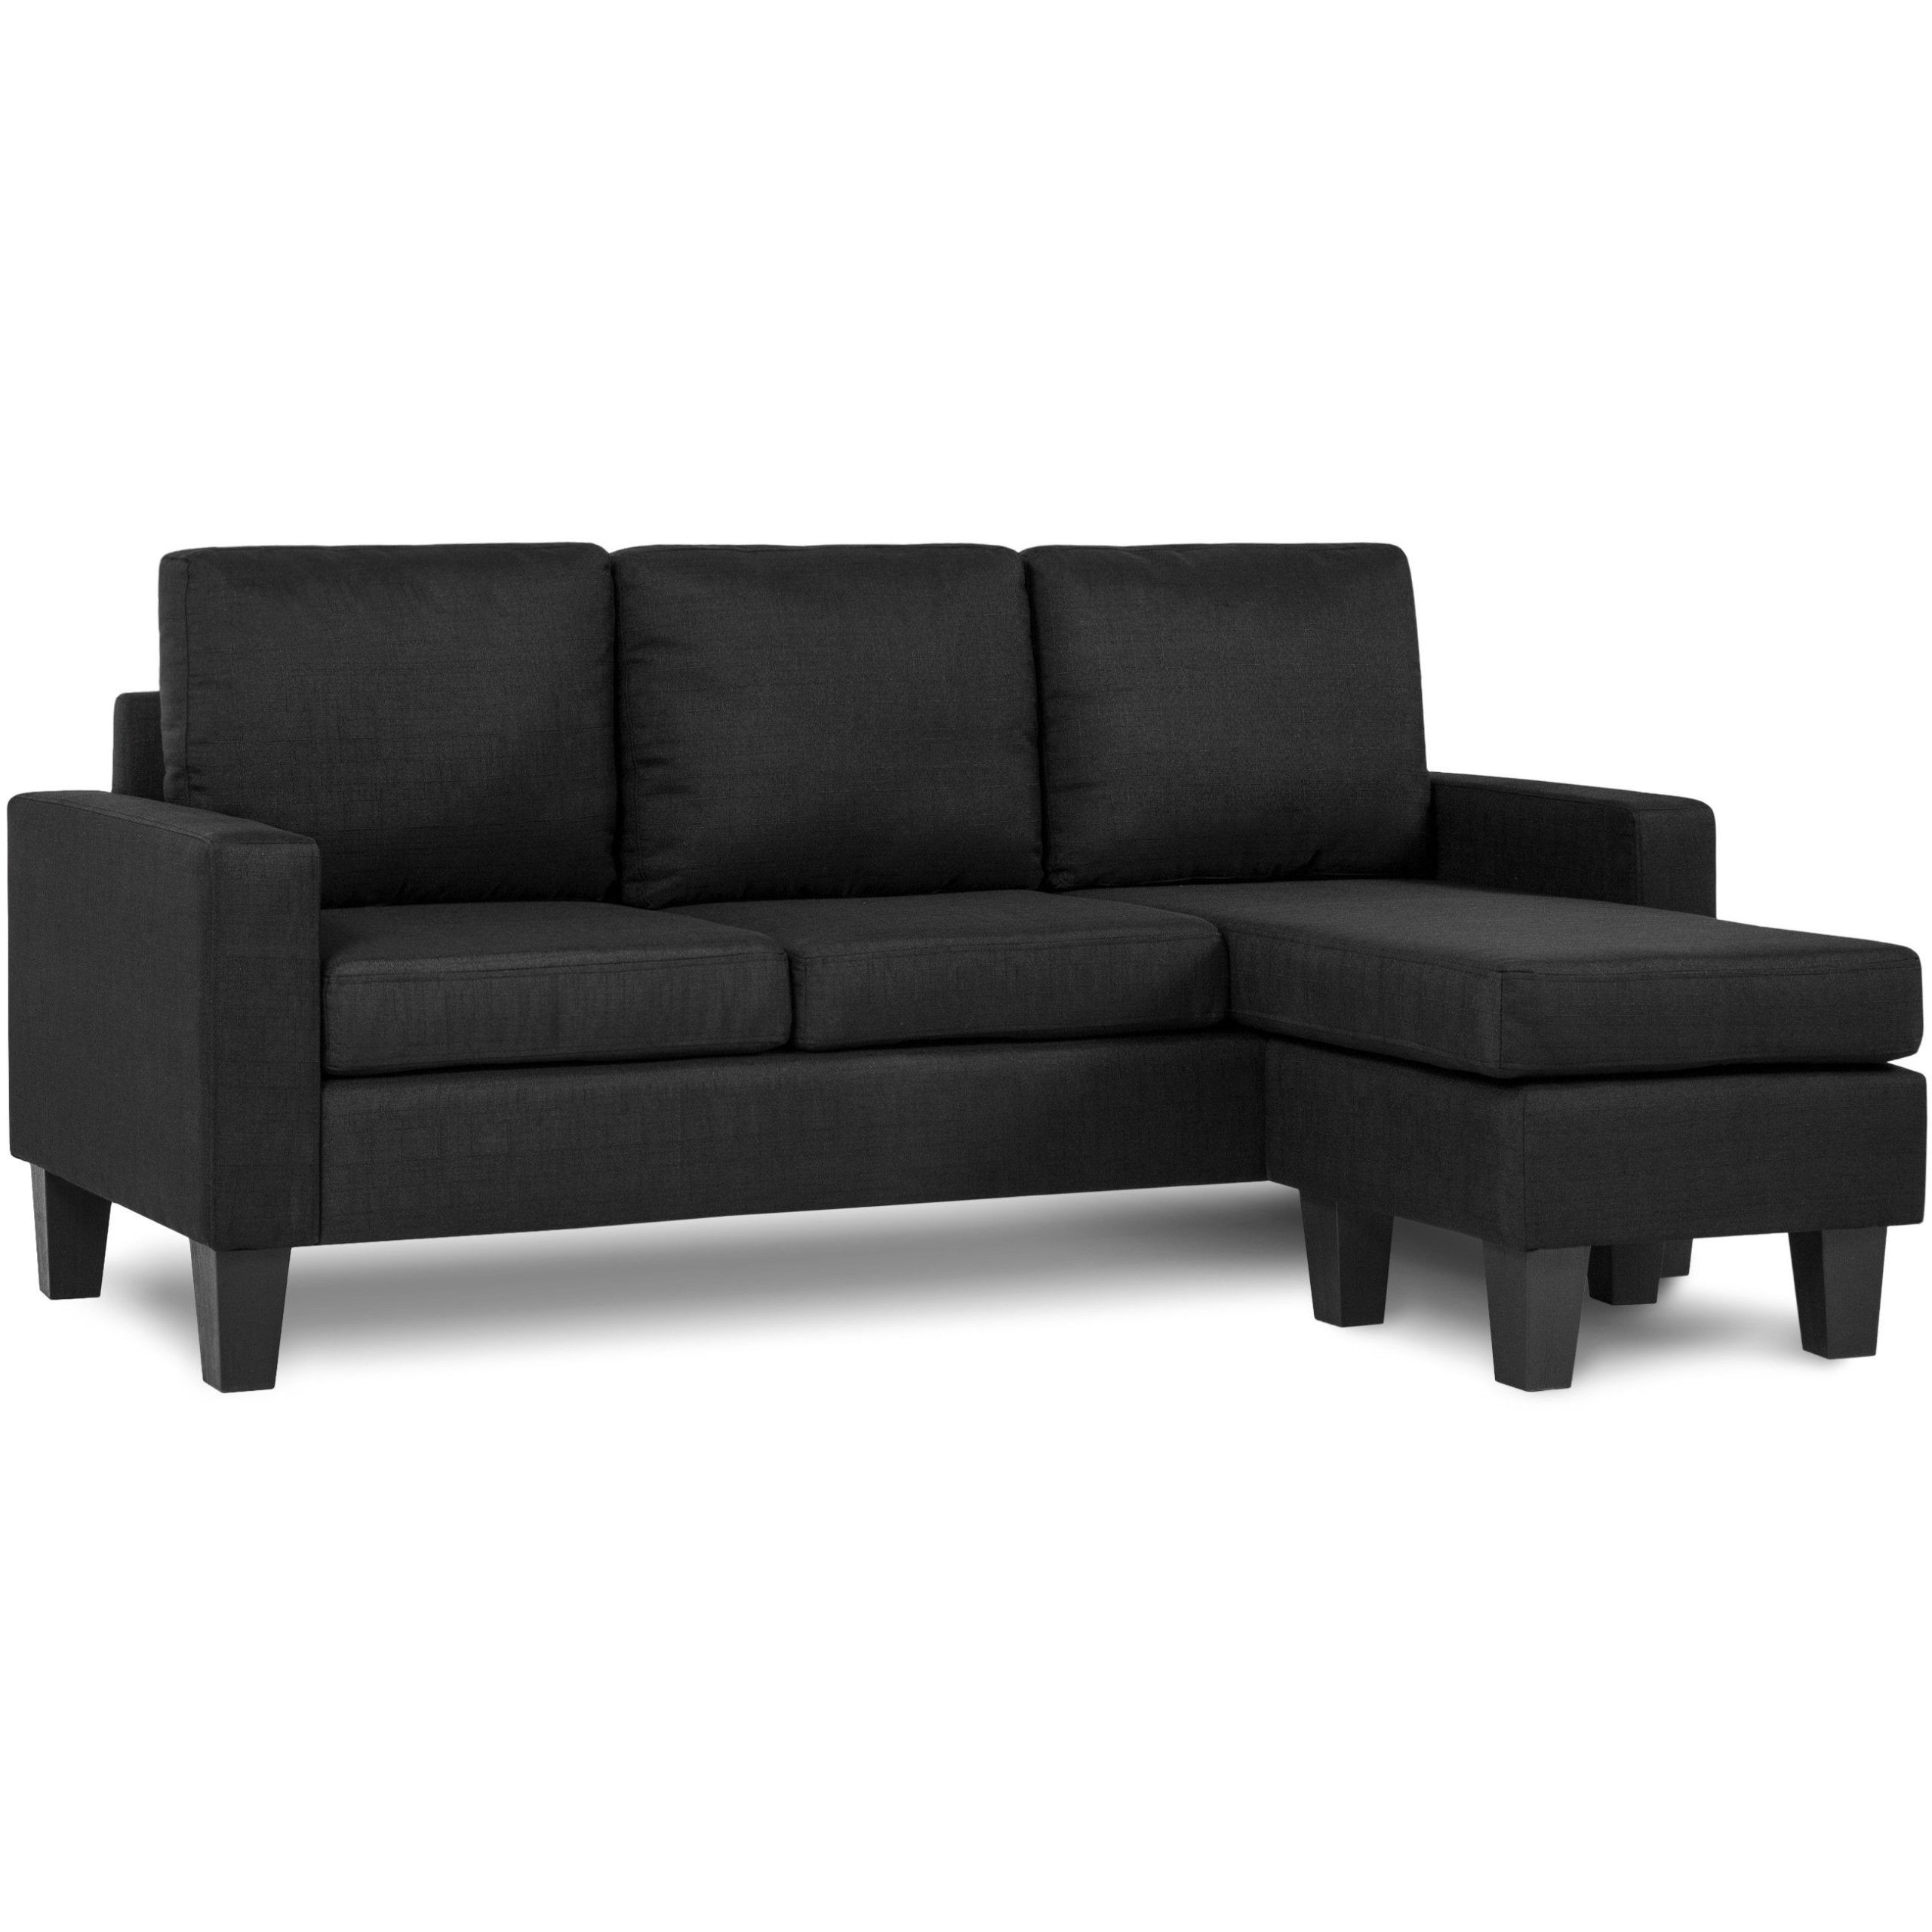 Best Choice Products Multifunctional Linen 3 Seat L Shape Sectional For 3 Seat L Shaped Sofas In Black (View 16 of 20)